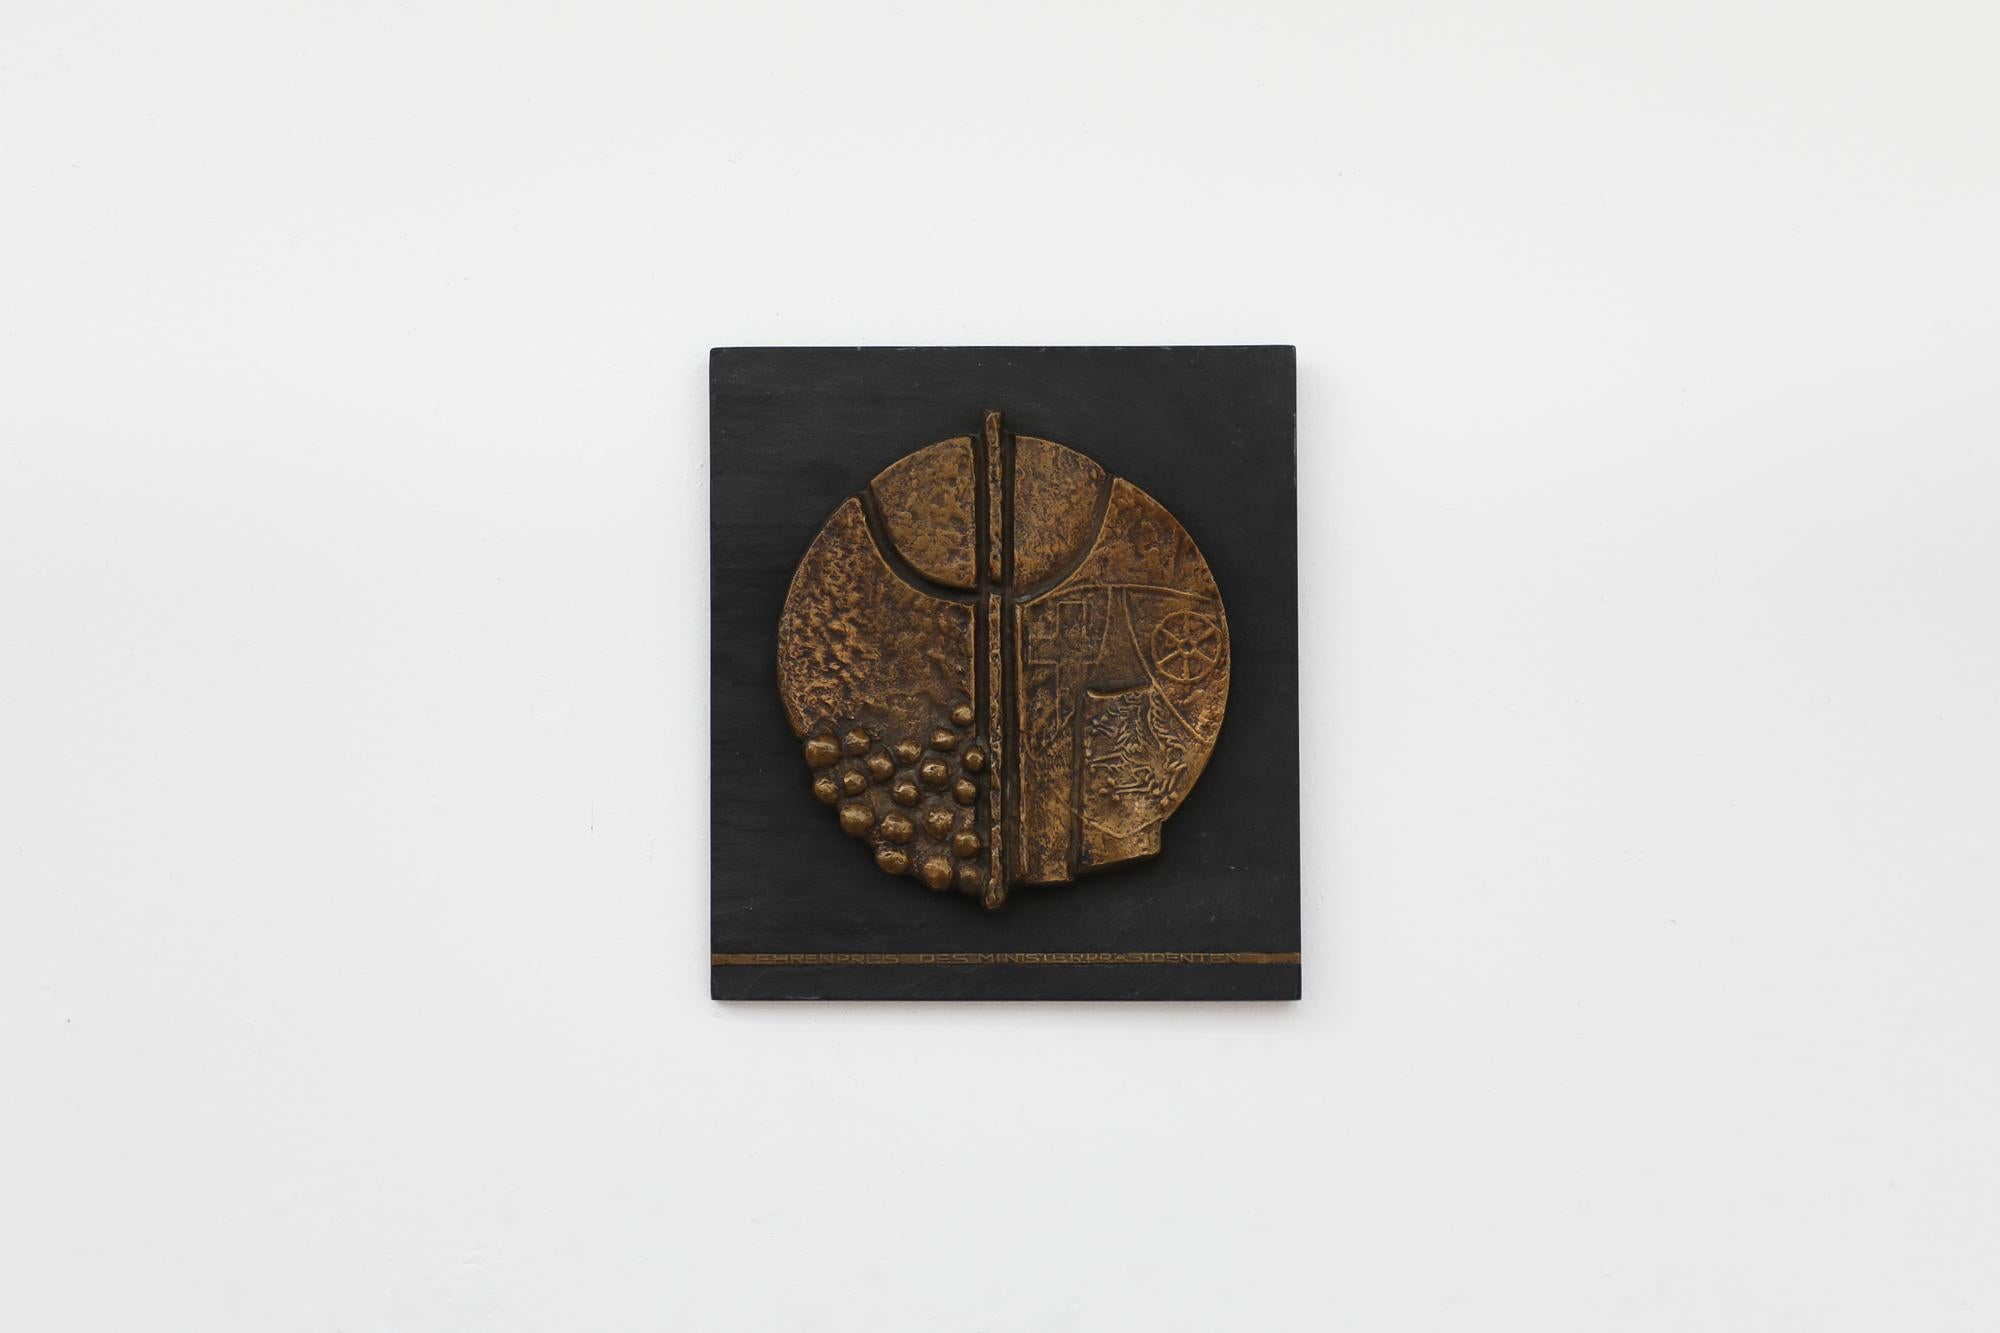 Hans Michael Kissel designed plaque to be given out as an honorary award by the prime minister of Germany. Mid to late 1970's. Beautifully cast, decorative, brass sculptural disc mounted on a slate slab with inset brass commemorative insignia.